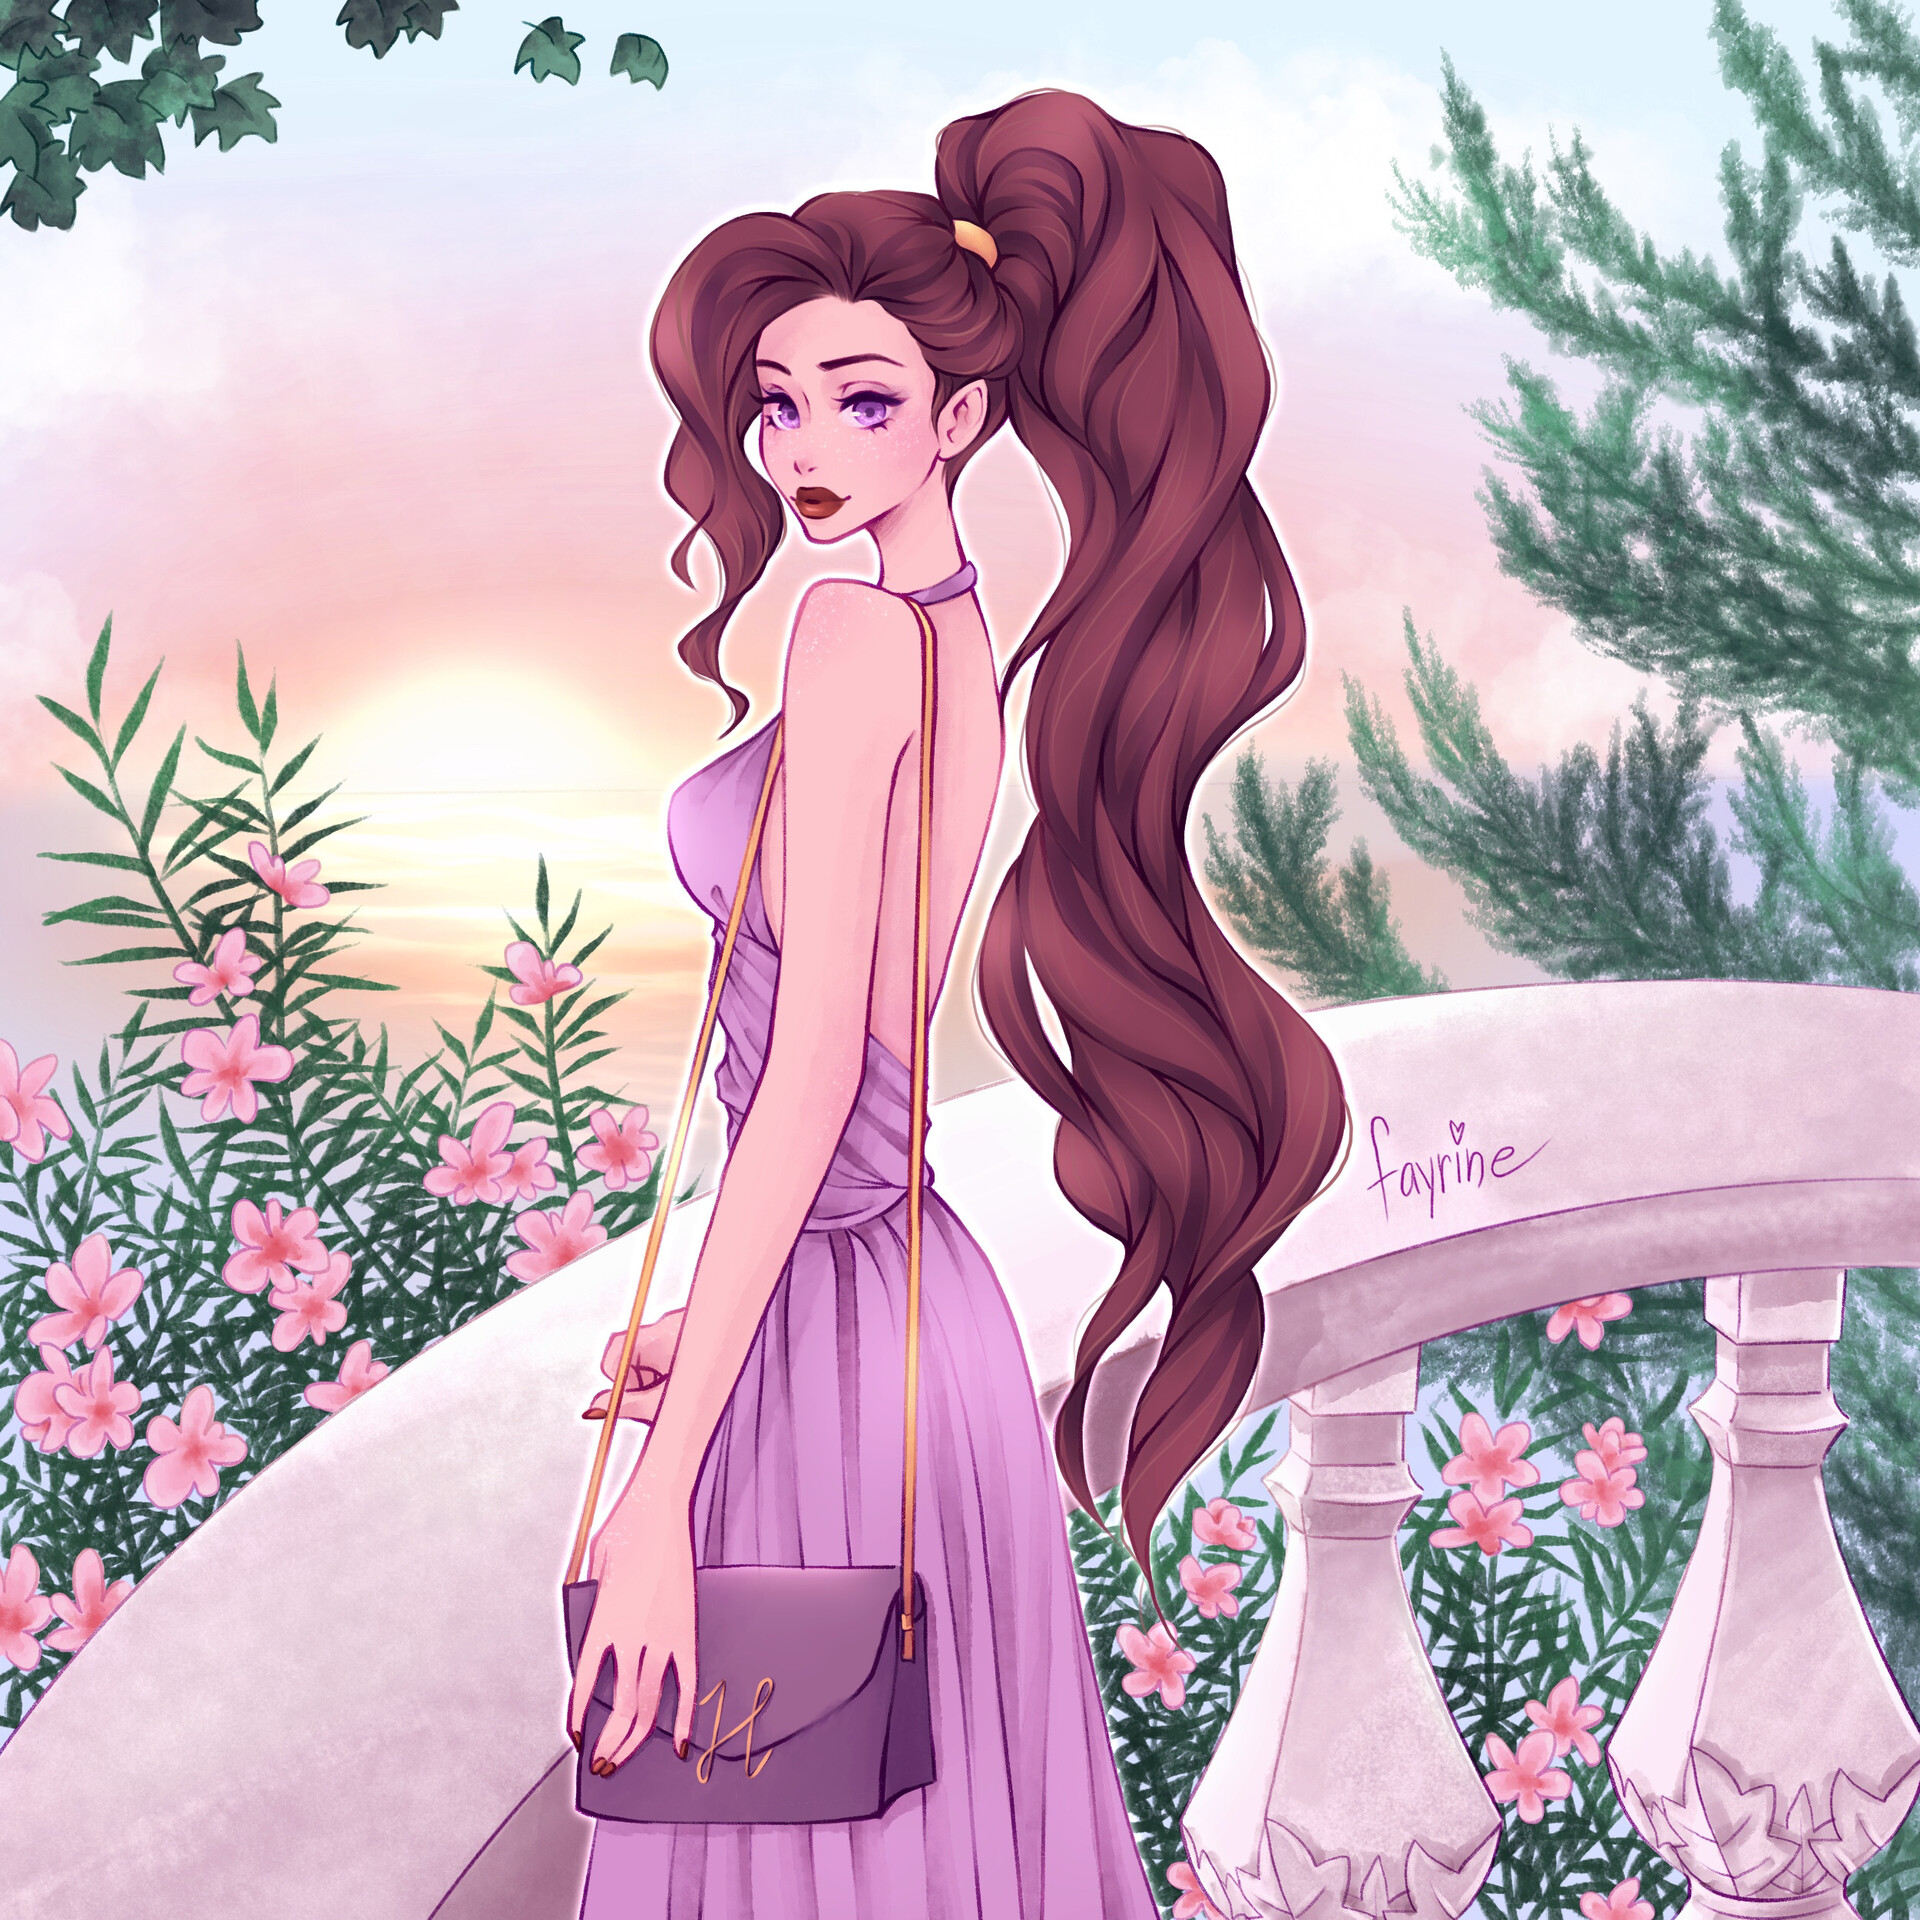 Illustration inspired by Megara and what a girl like her would live like in...